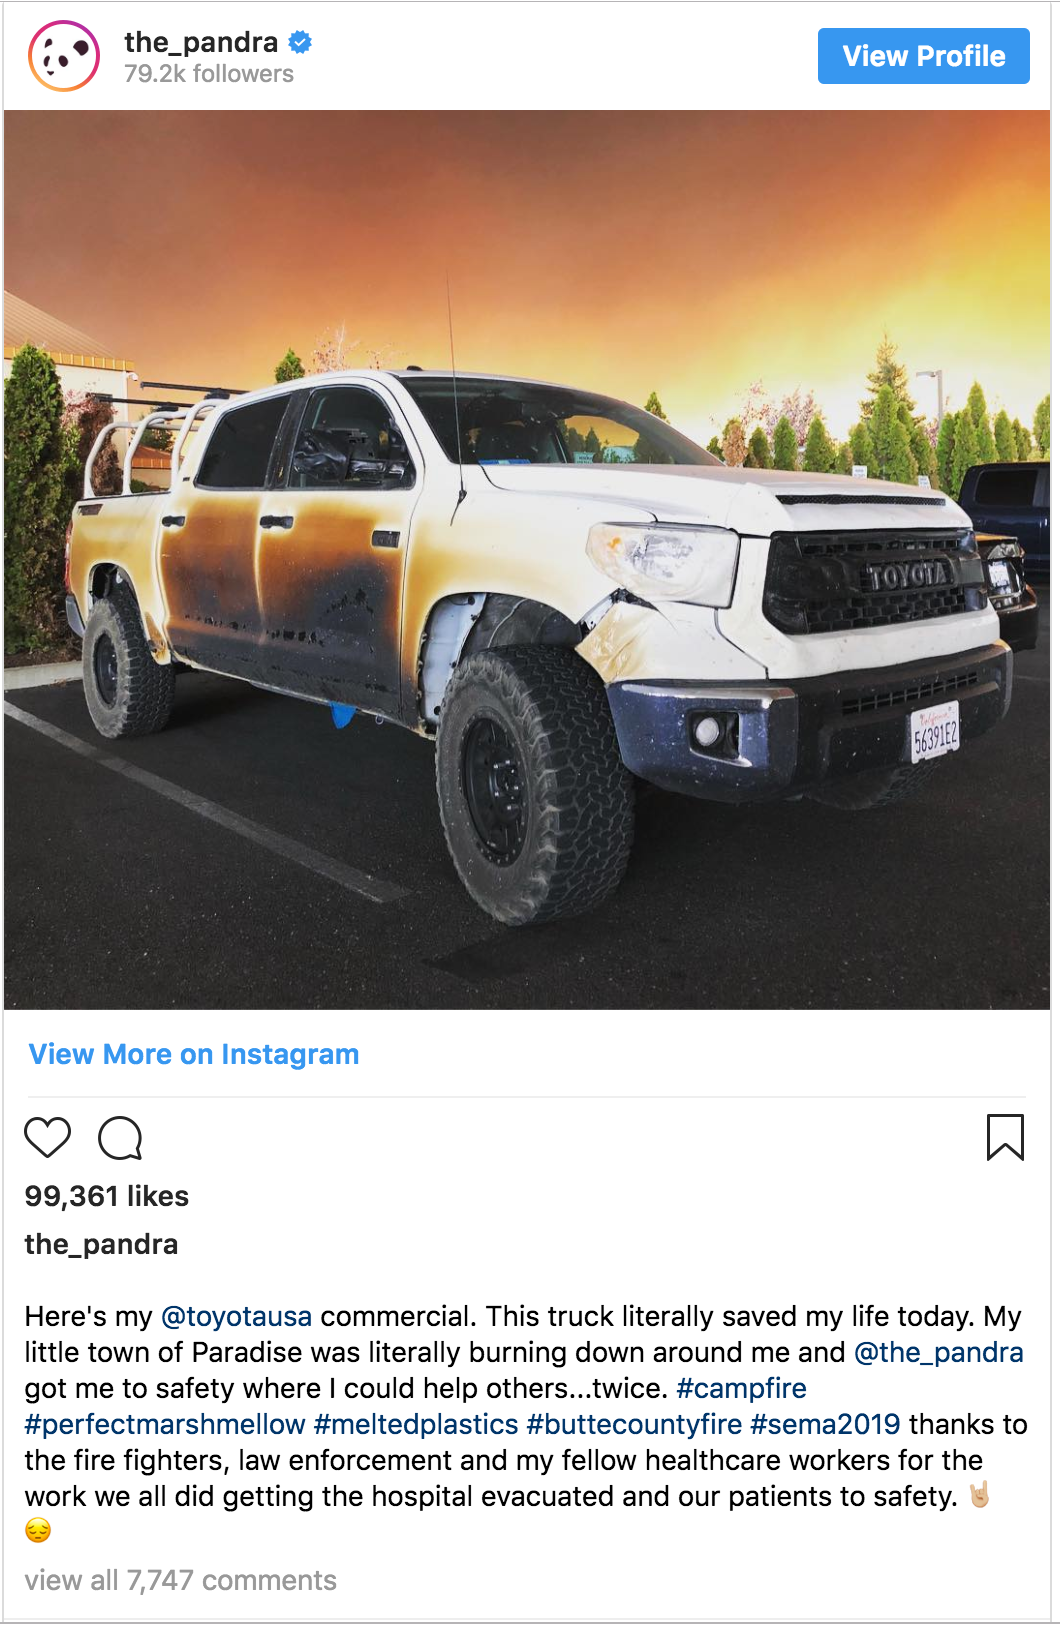 Pandra's Park Fire Tundra on Display at Toyota Corporate HQ